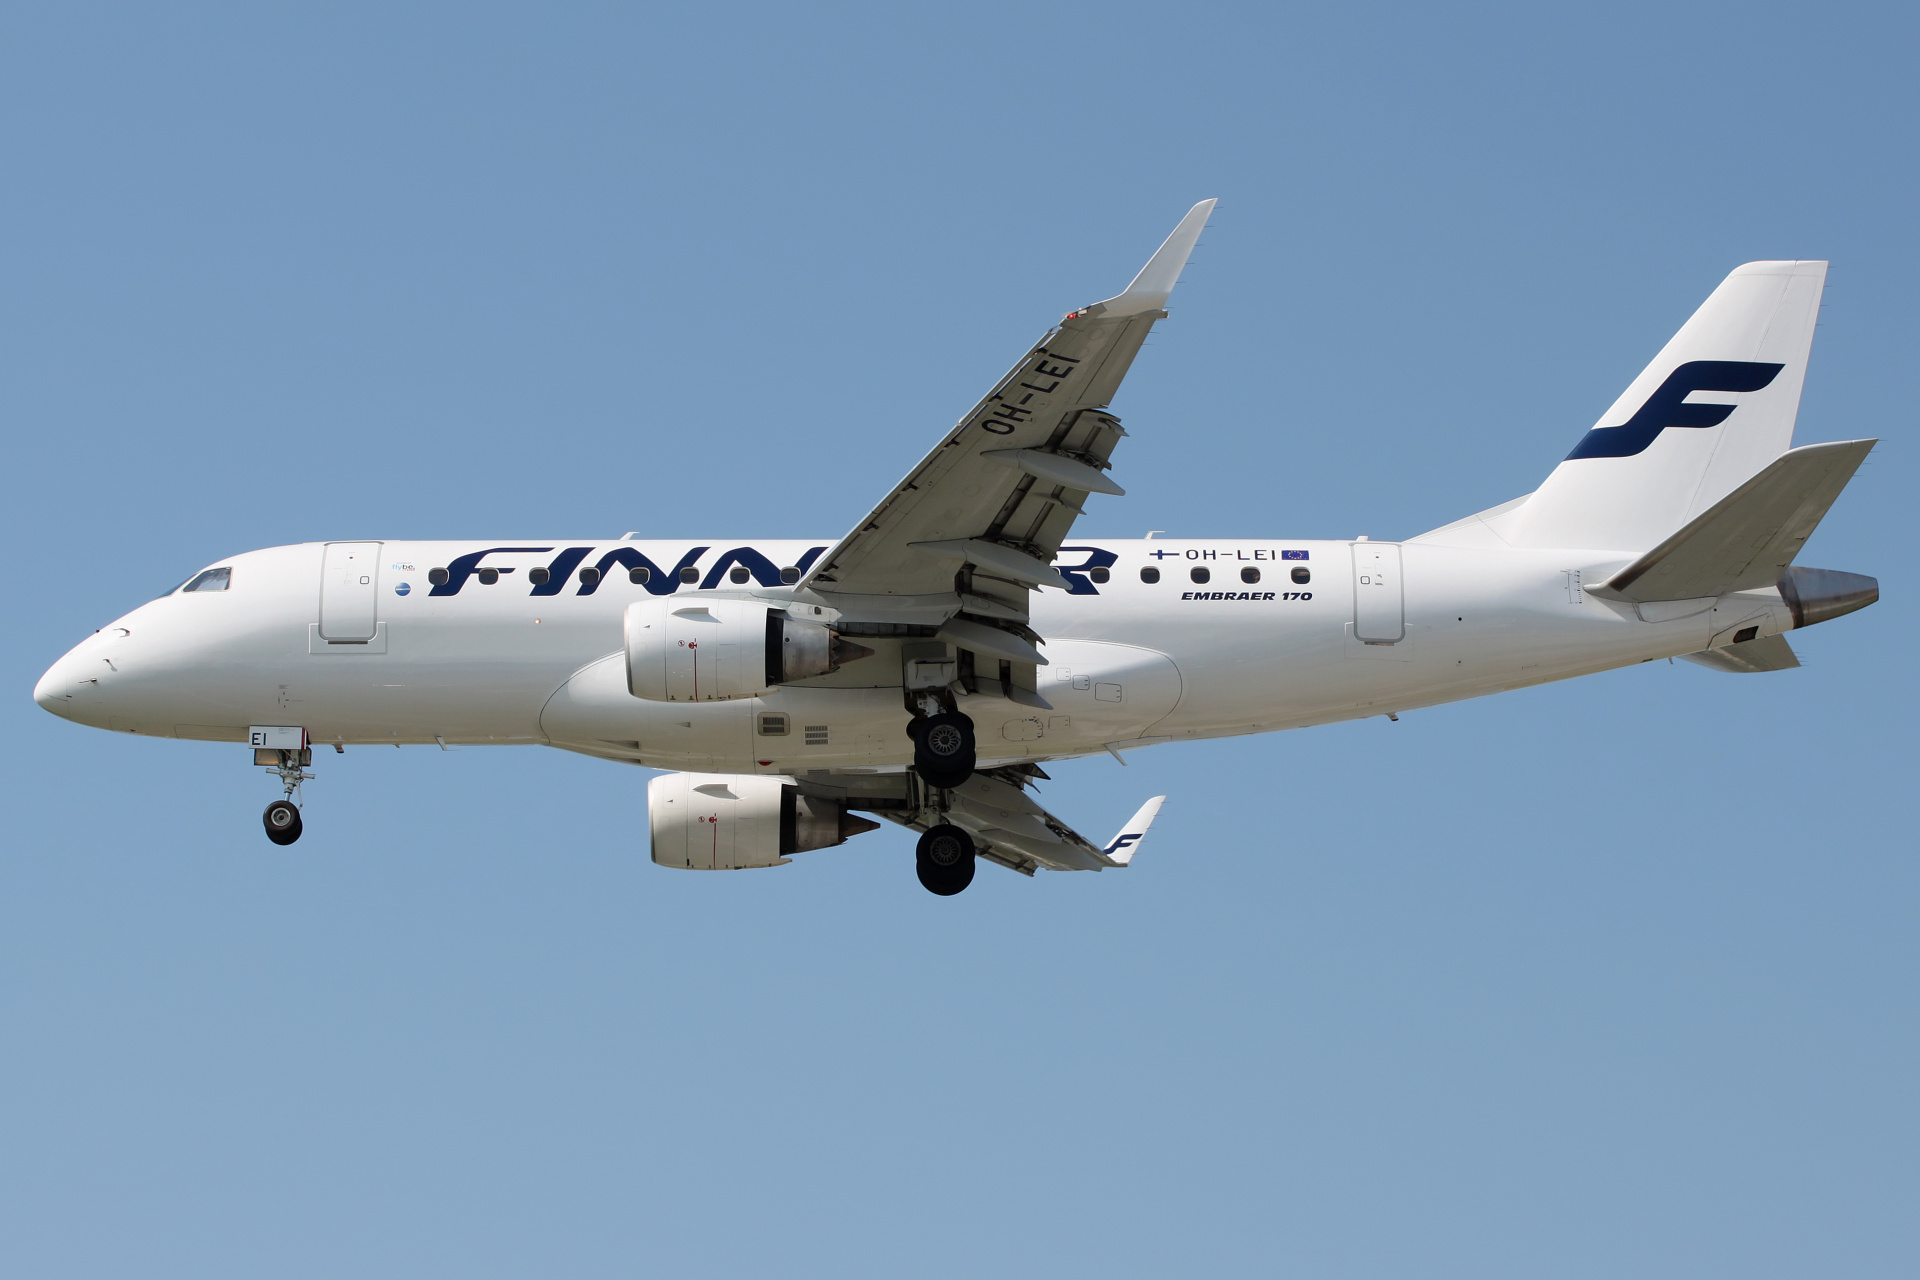 OH-LEI (new livery) (Aircraft » EPWA Spotting » Embraer E170 » Finnair)